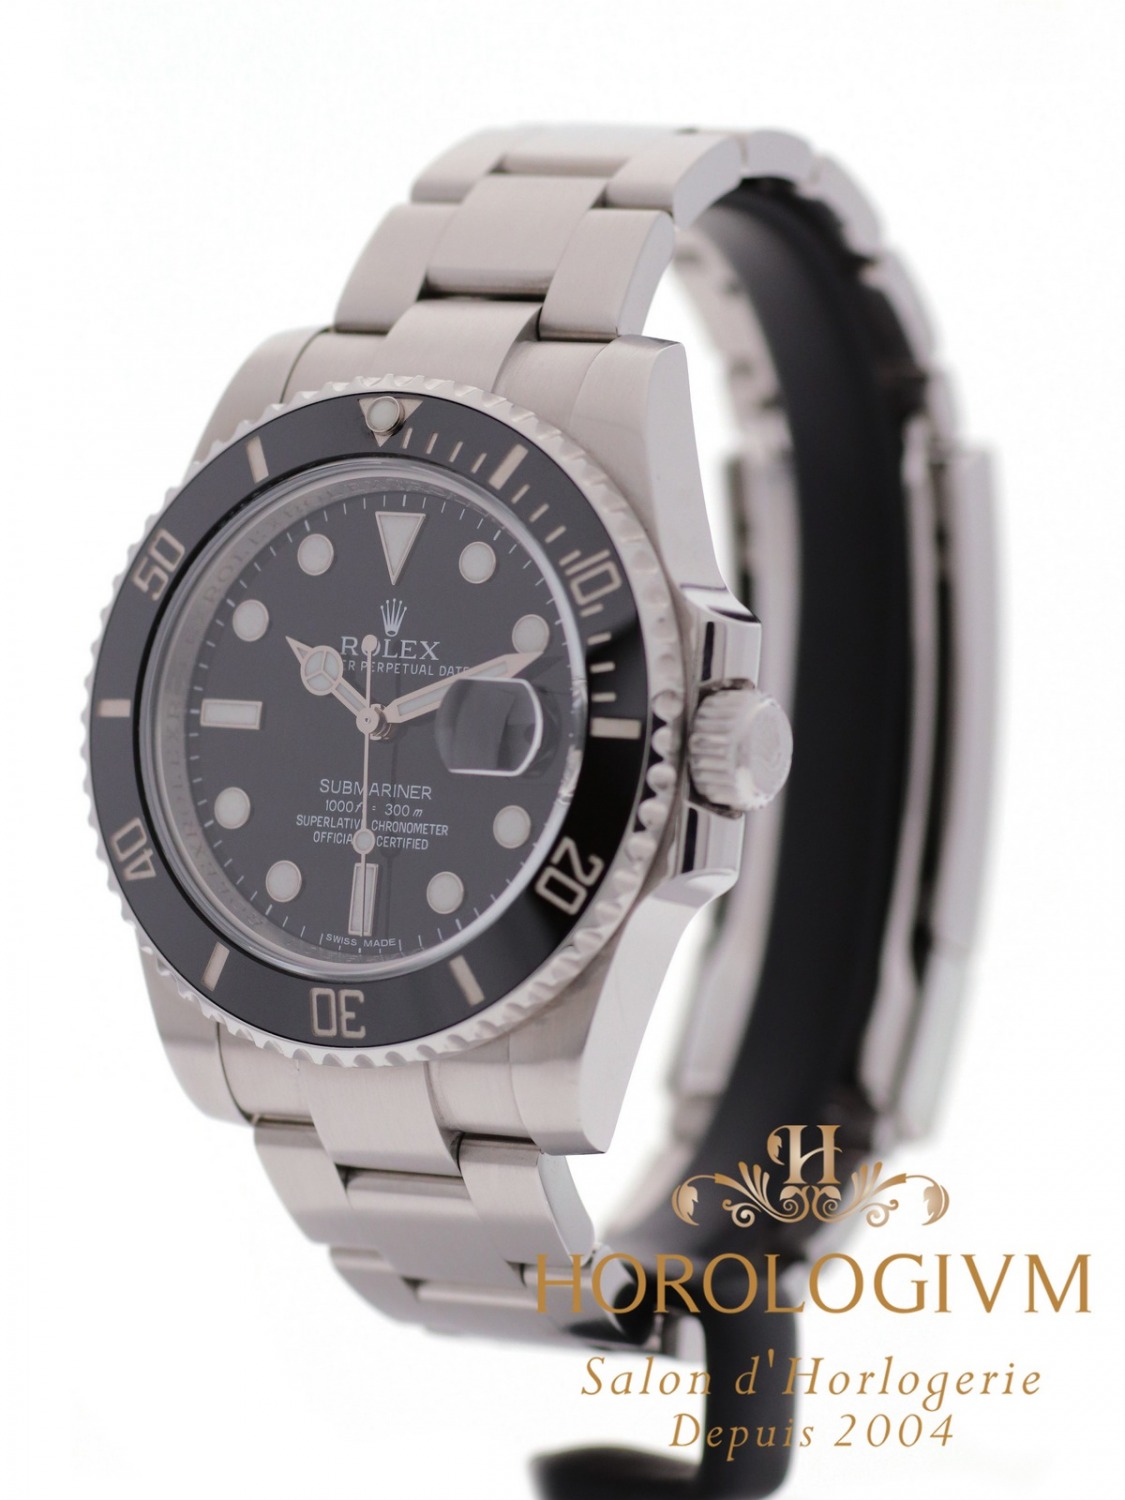 Rolex Oyster Perpetual Date Submariner 40MM watch, silver (case) and black (bezel)